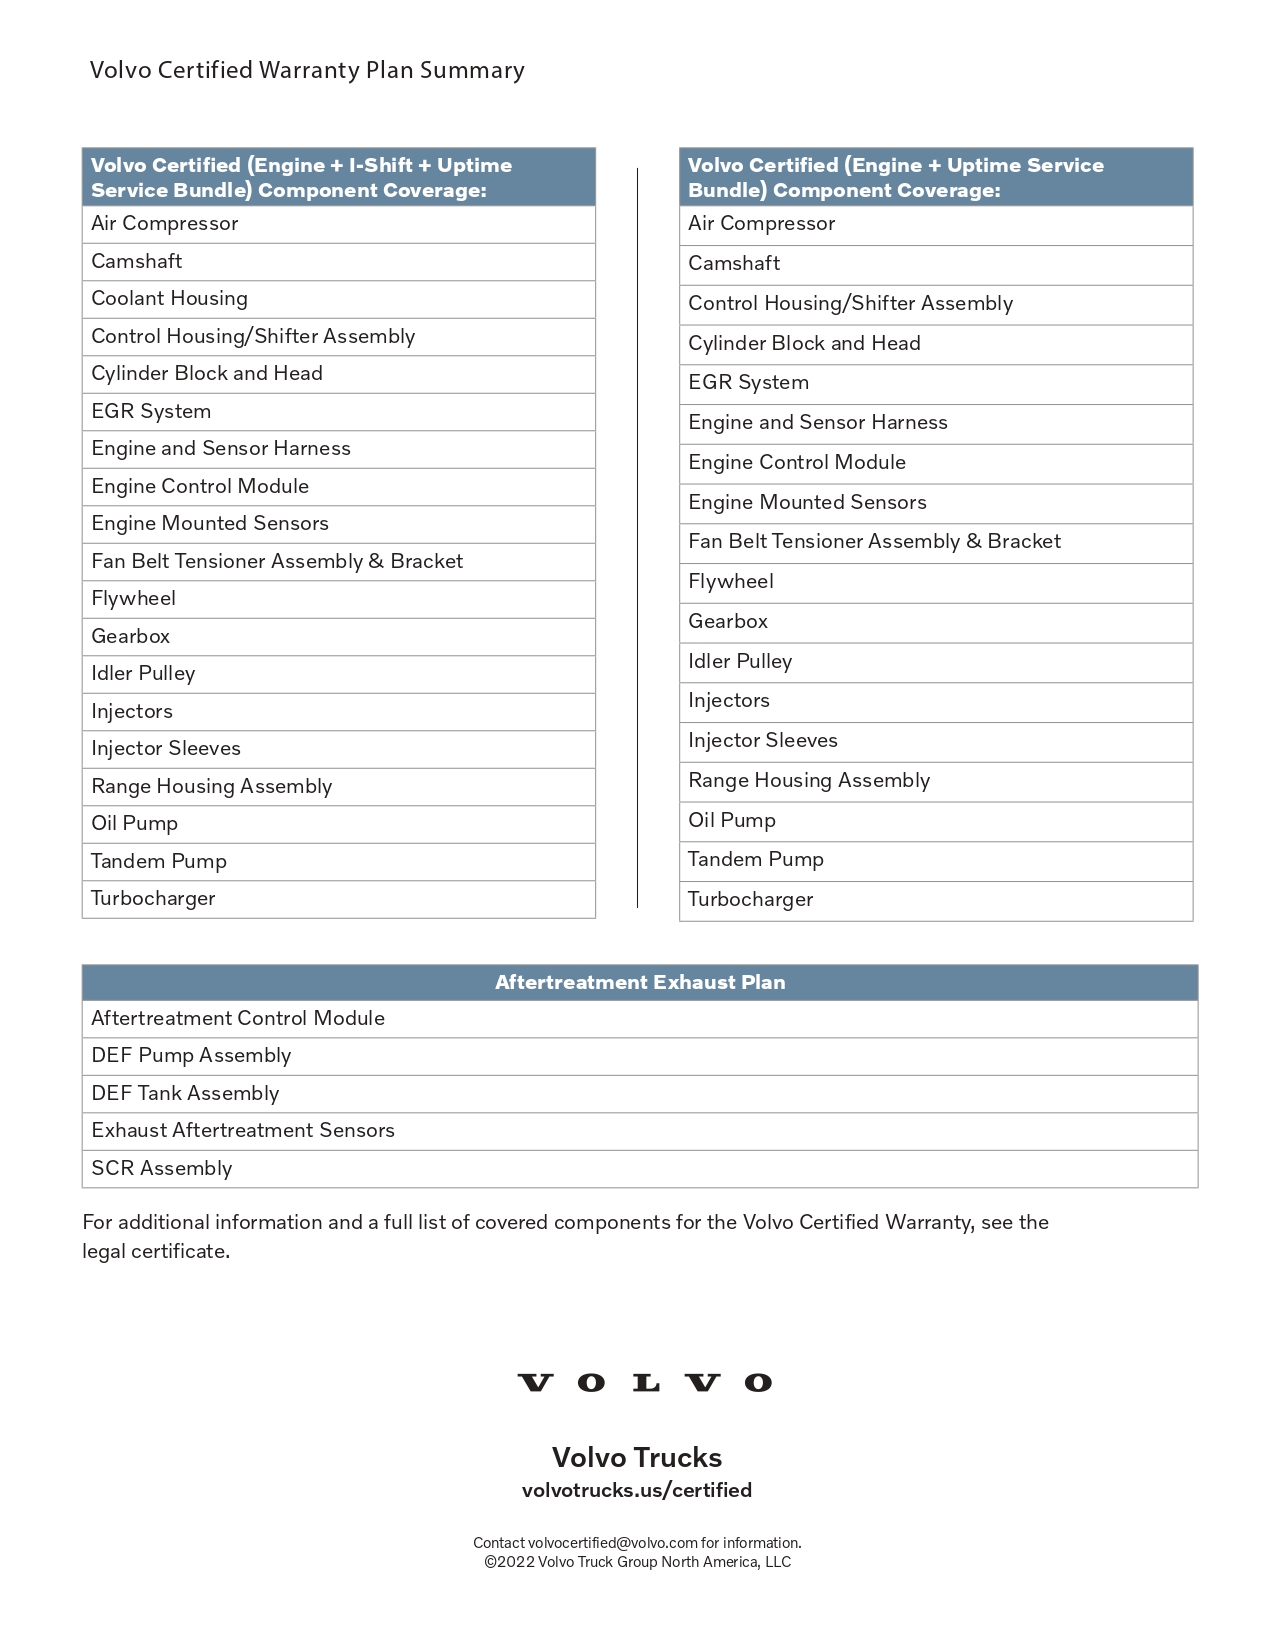 Volvo CertifiedWarranty Rates_compressed_page-0002